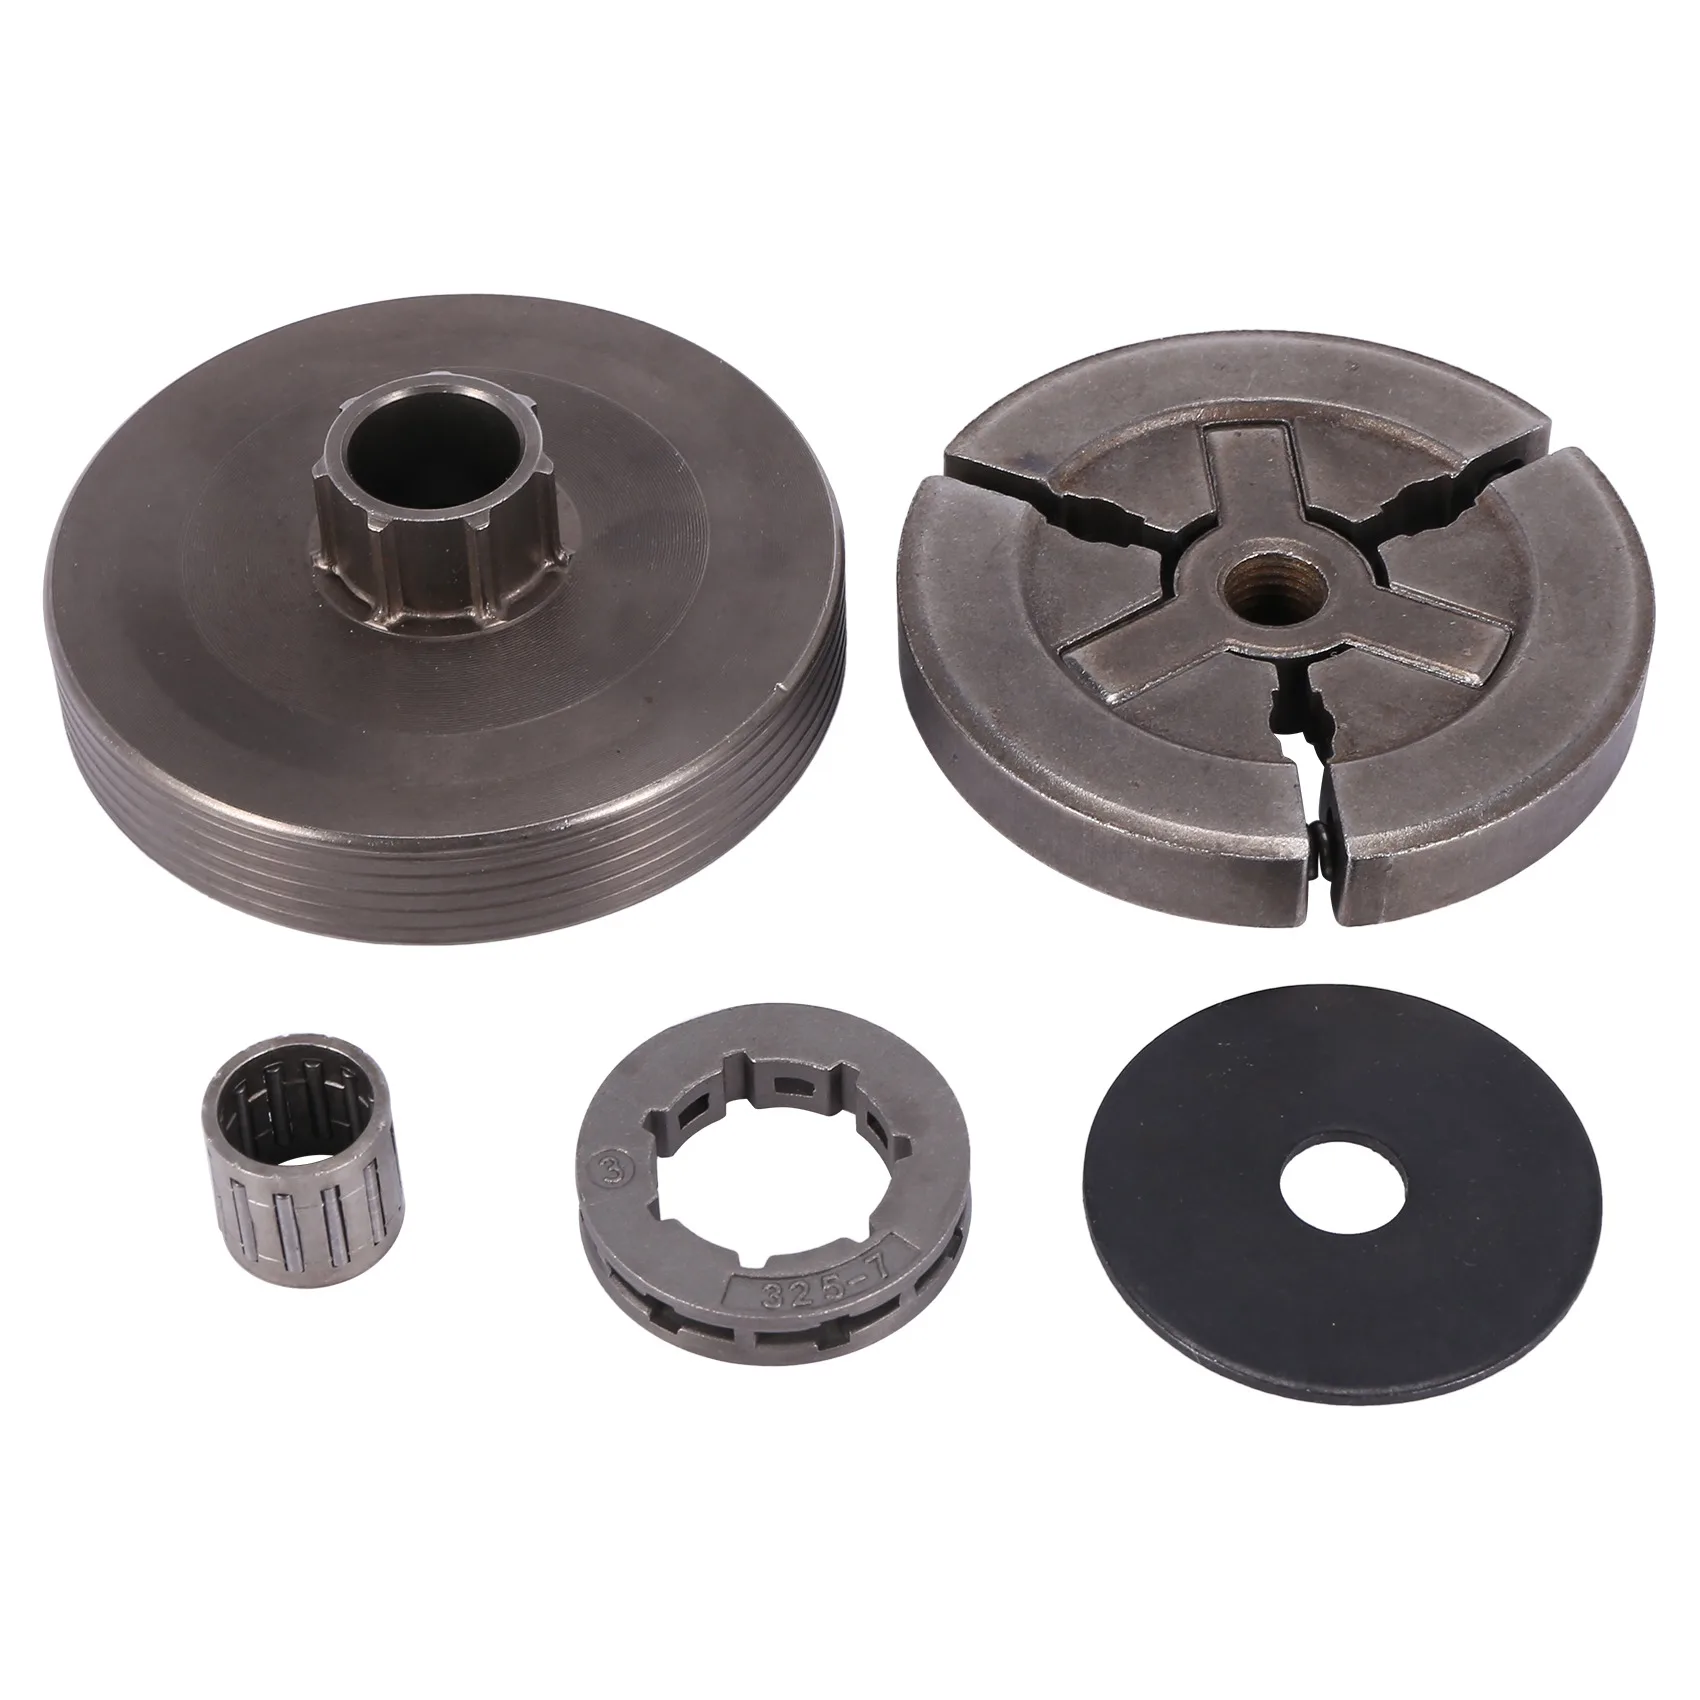 

Clutch Drum & Clutch & Sprocket Rim & Needle Bearing Fit for Chinese Chainsaw 4500 5200 5800